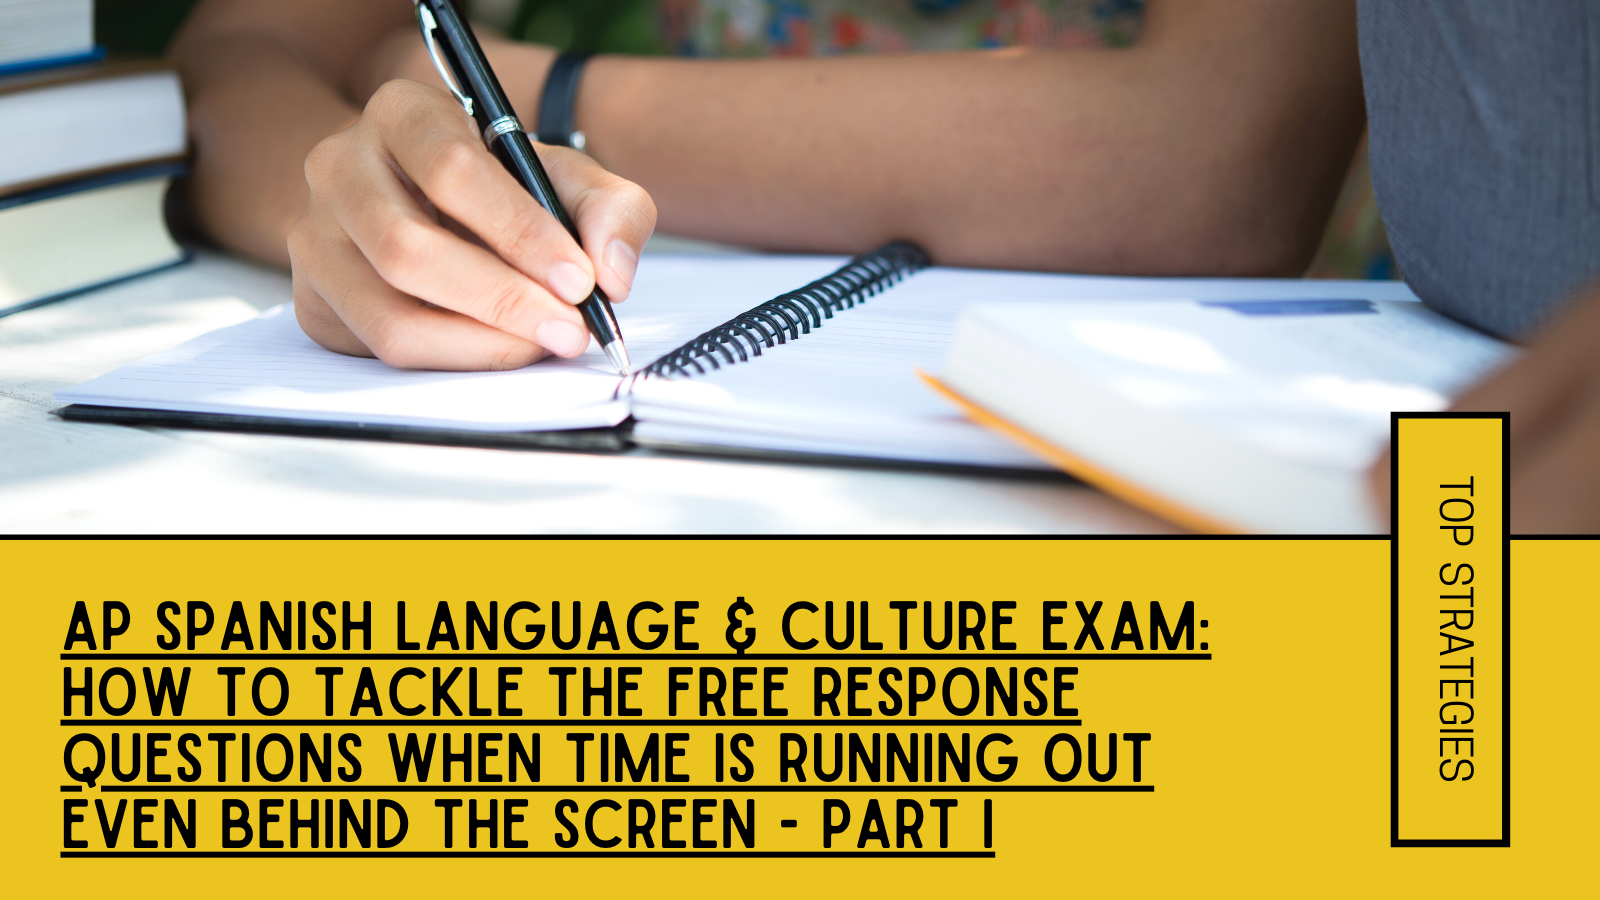 ap-spanish-language-culture-exam-how-to-tackle-the-free-response